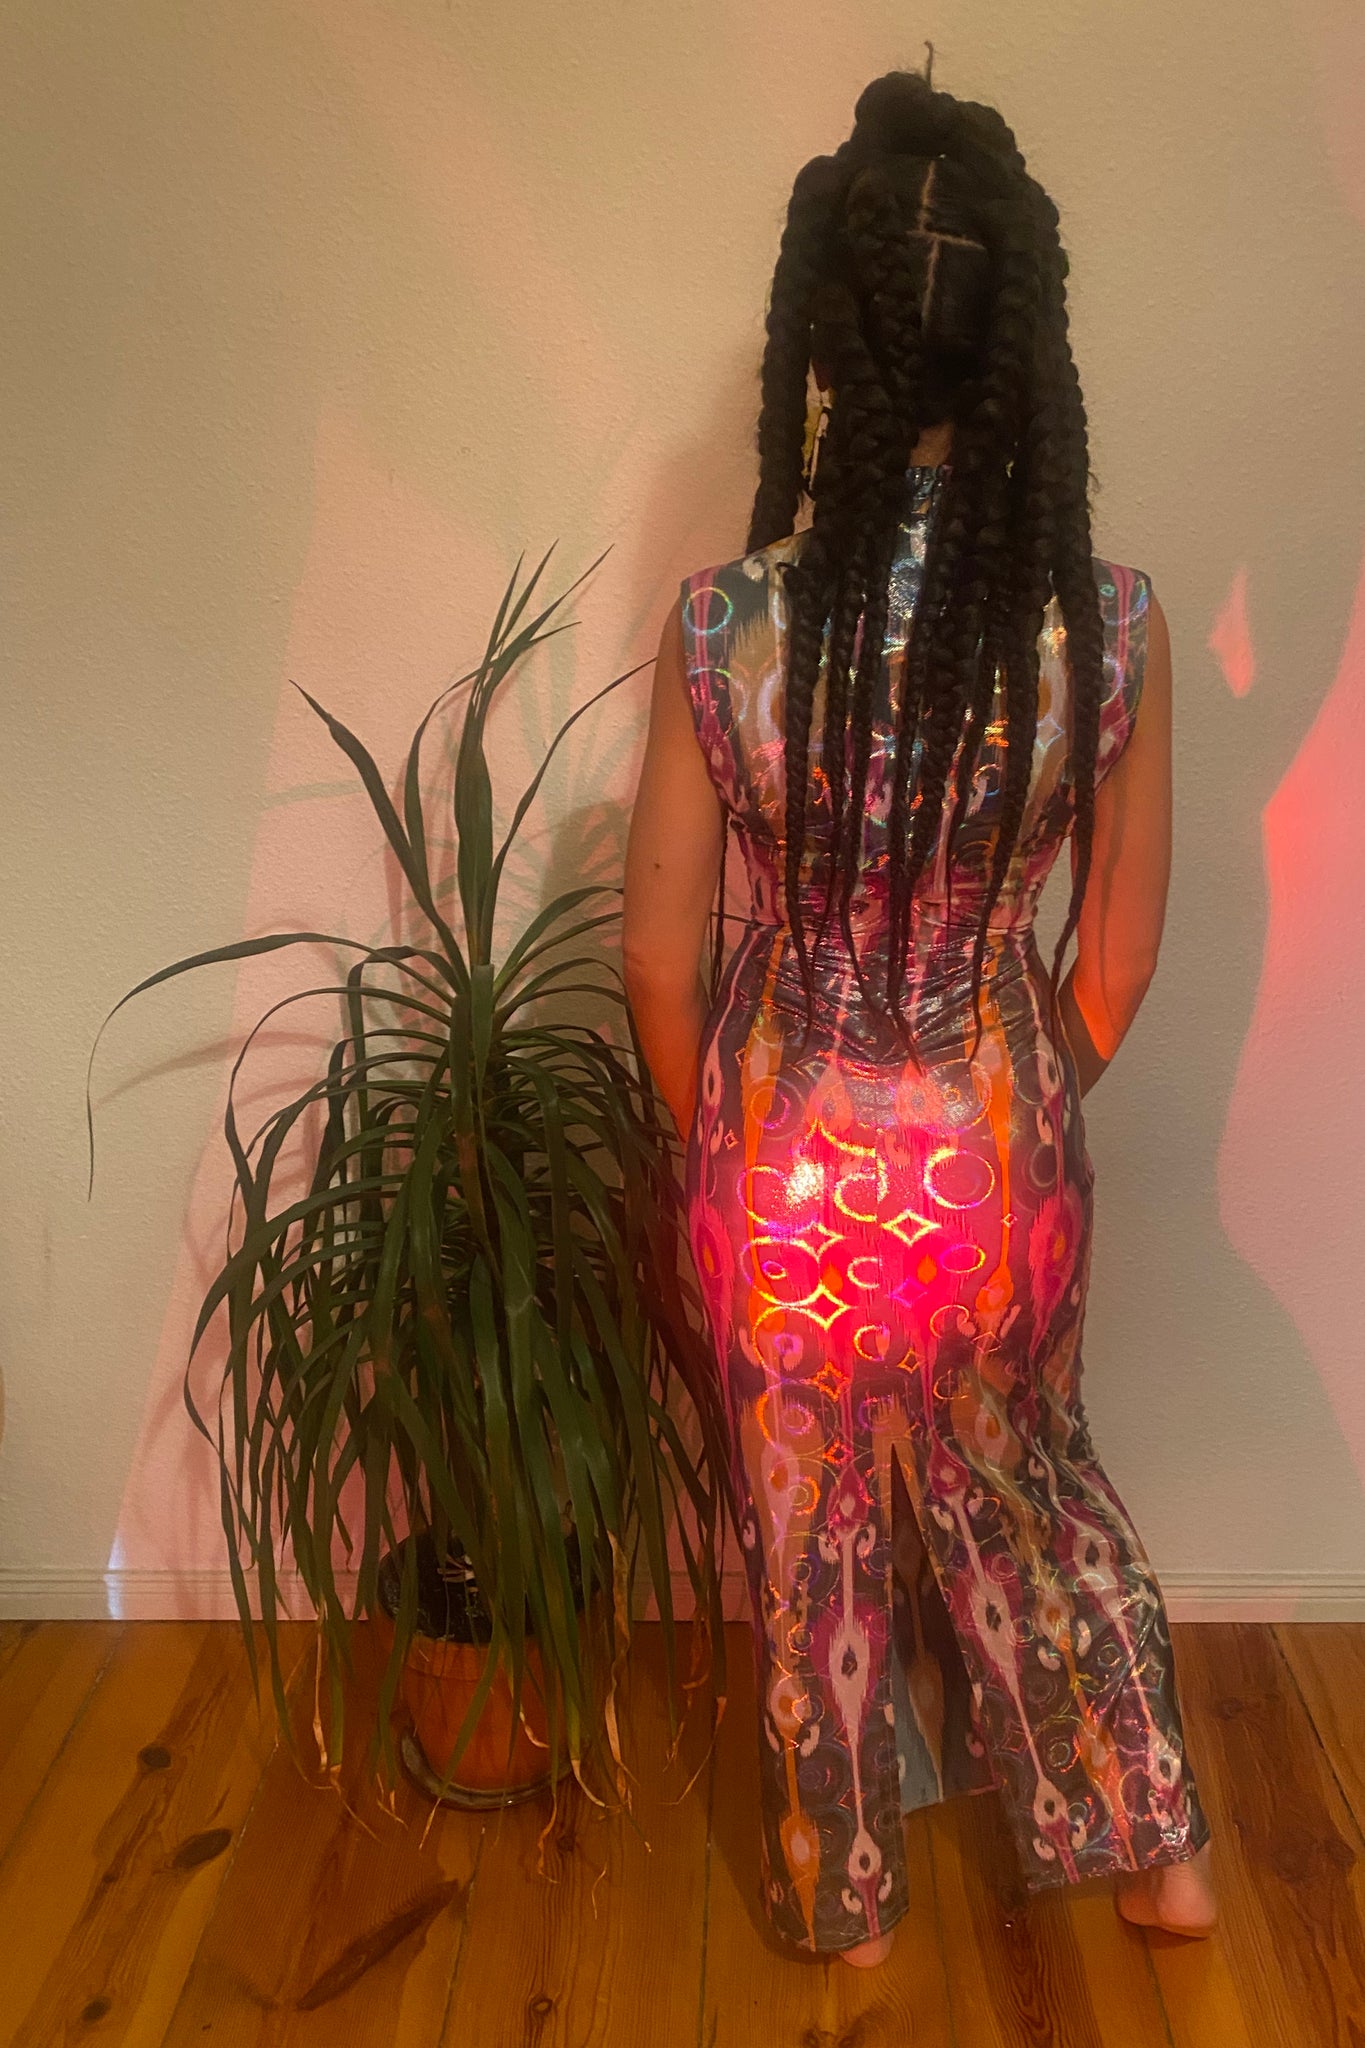 A woman's back side next to a plant wearing a colourful adras/ikat dress.